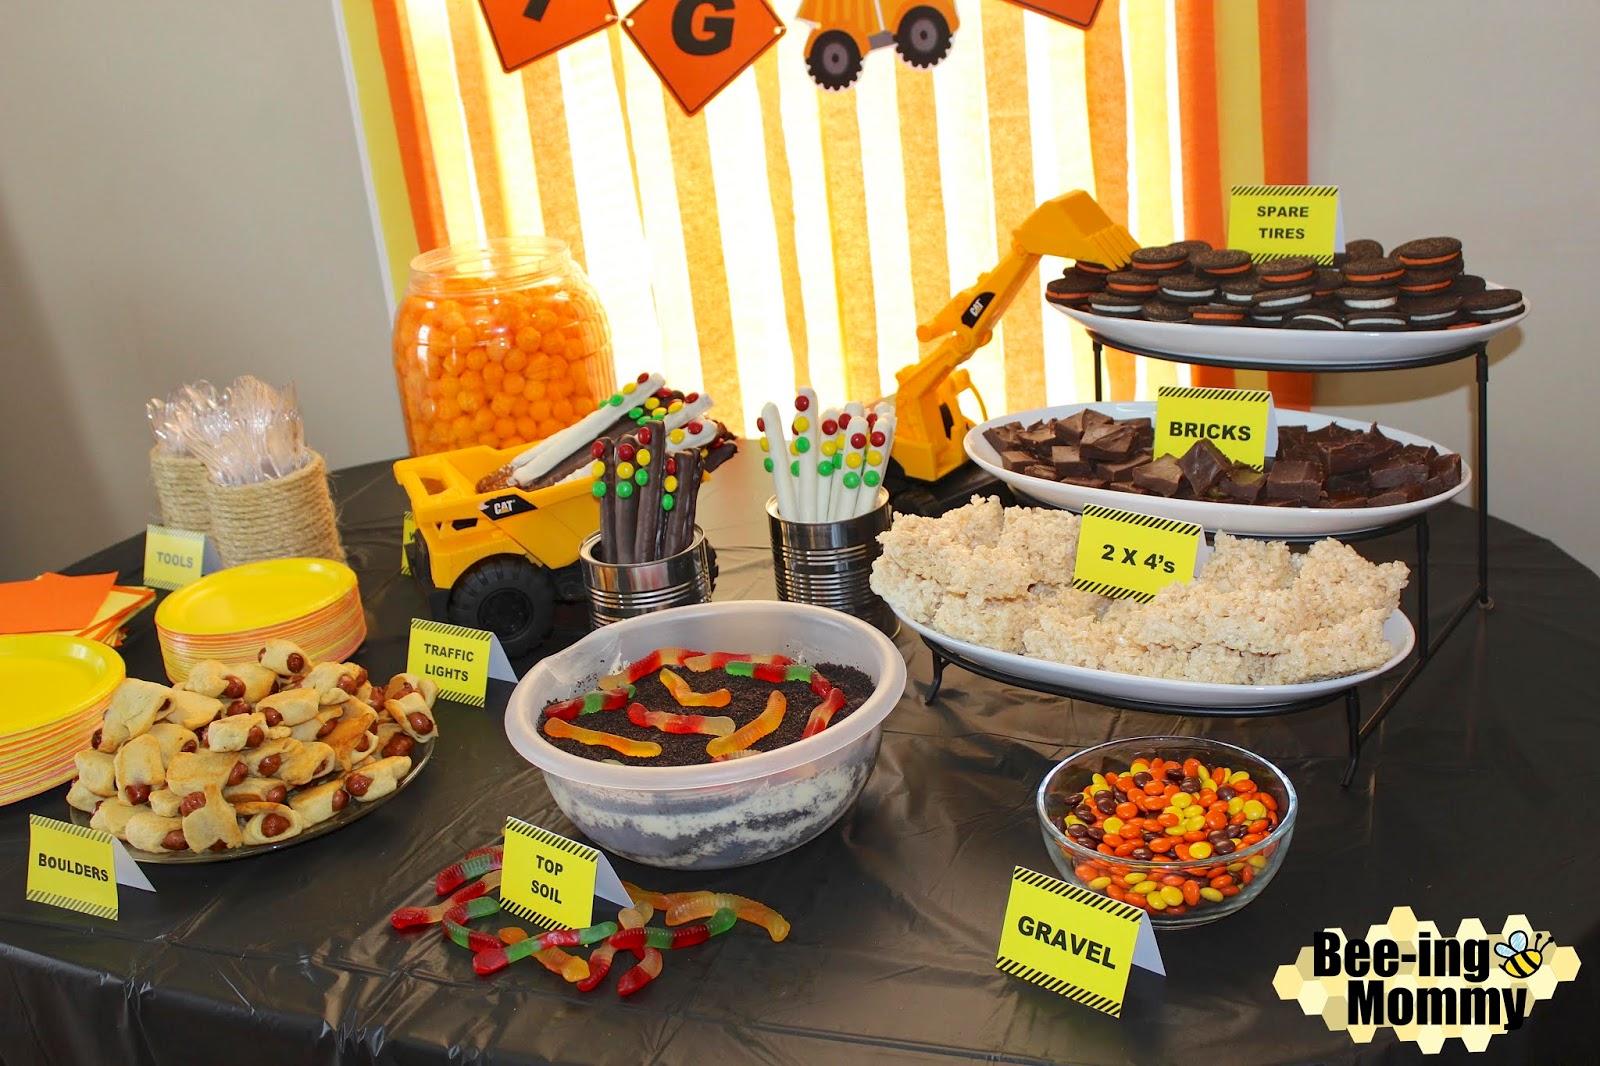 Construction Party Food Ideas - Printable Templates